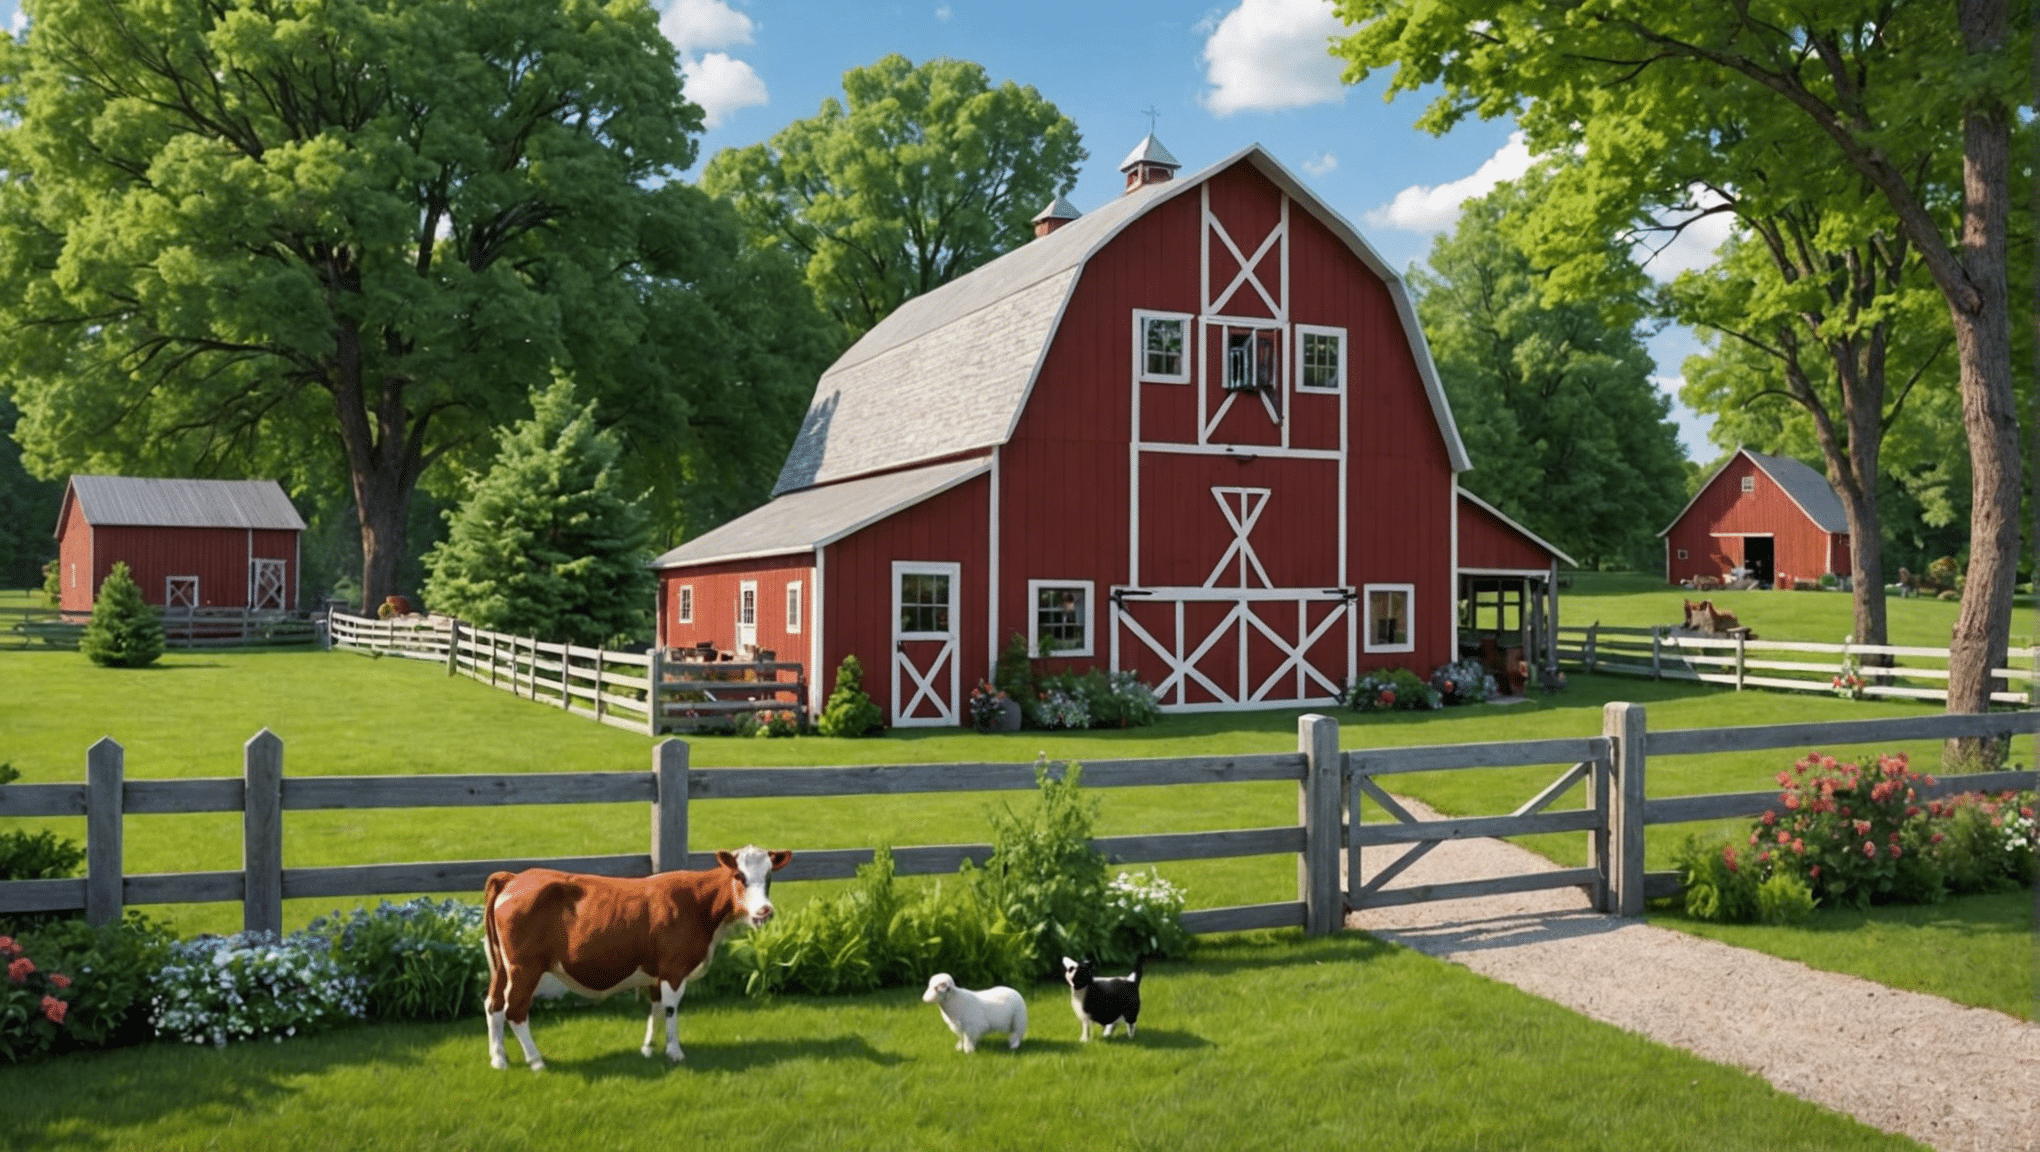 discover the advantages and rewards of raising barn animals in your backyard. explore the benefits of connecting with nature and producing your own food.